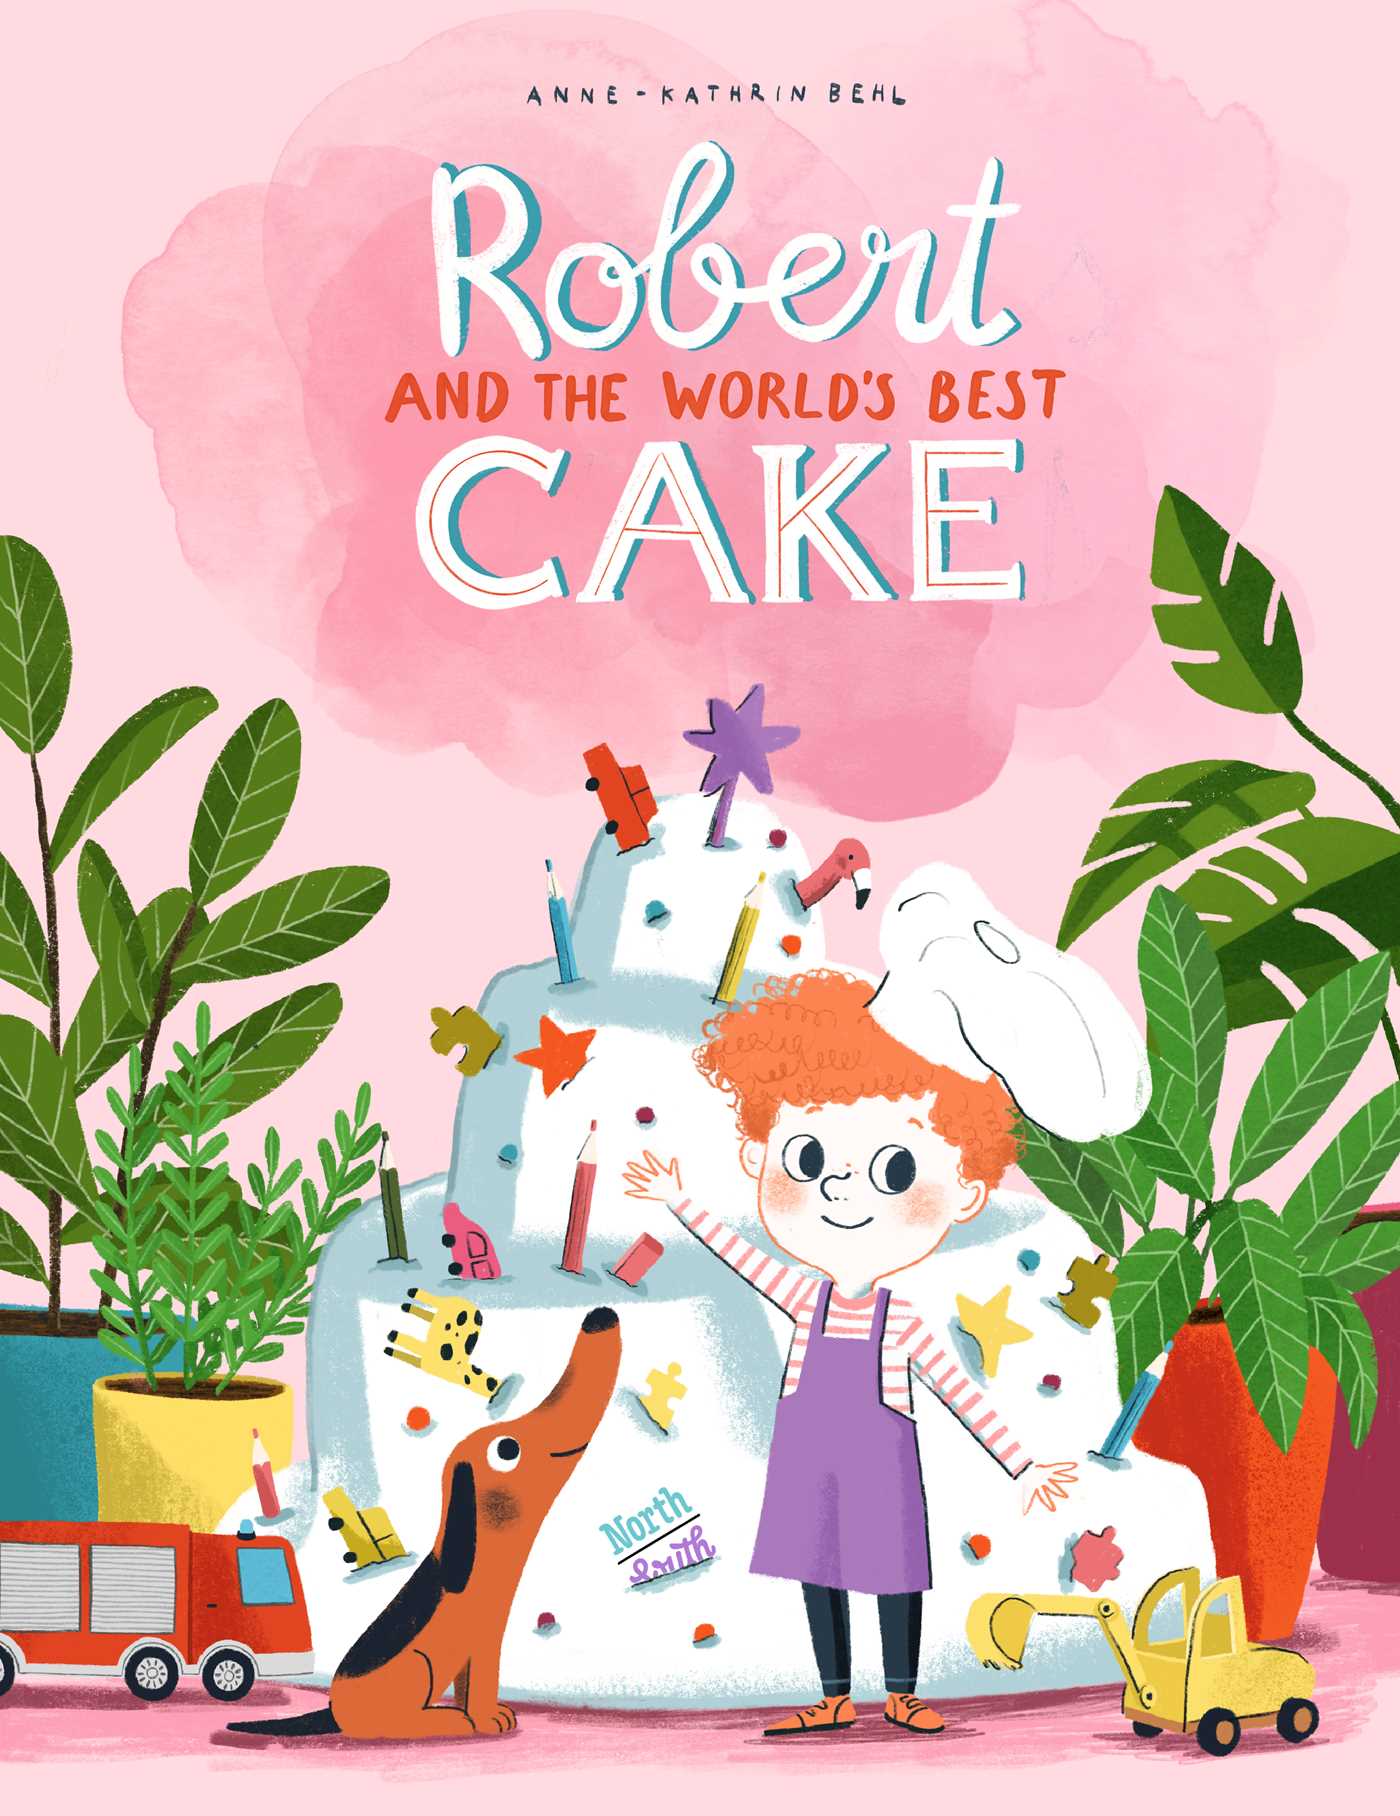 Robert and the worlds best cake book cover.